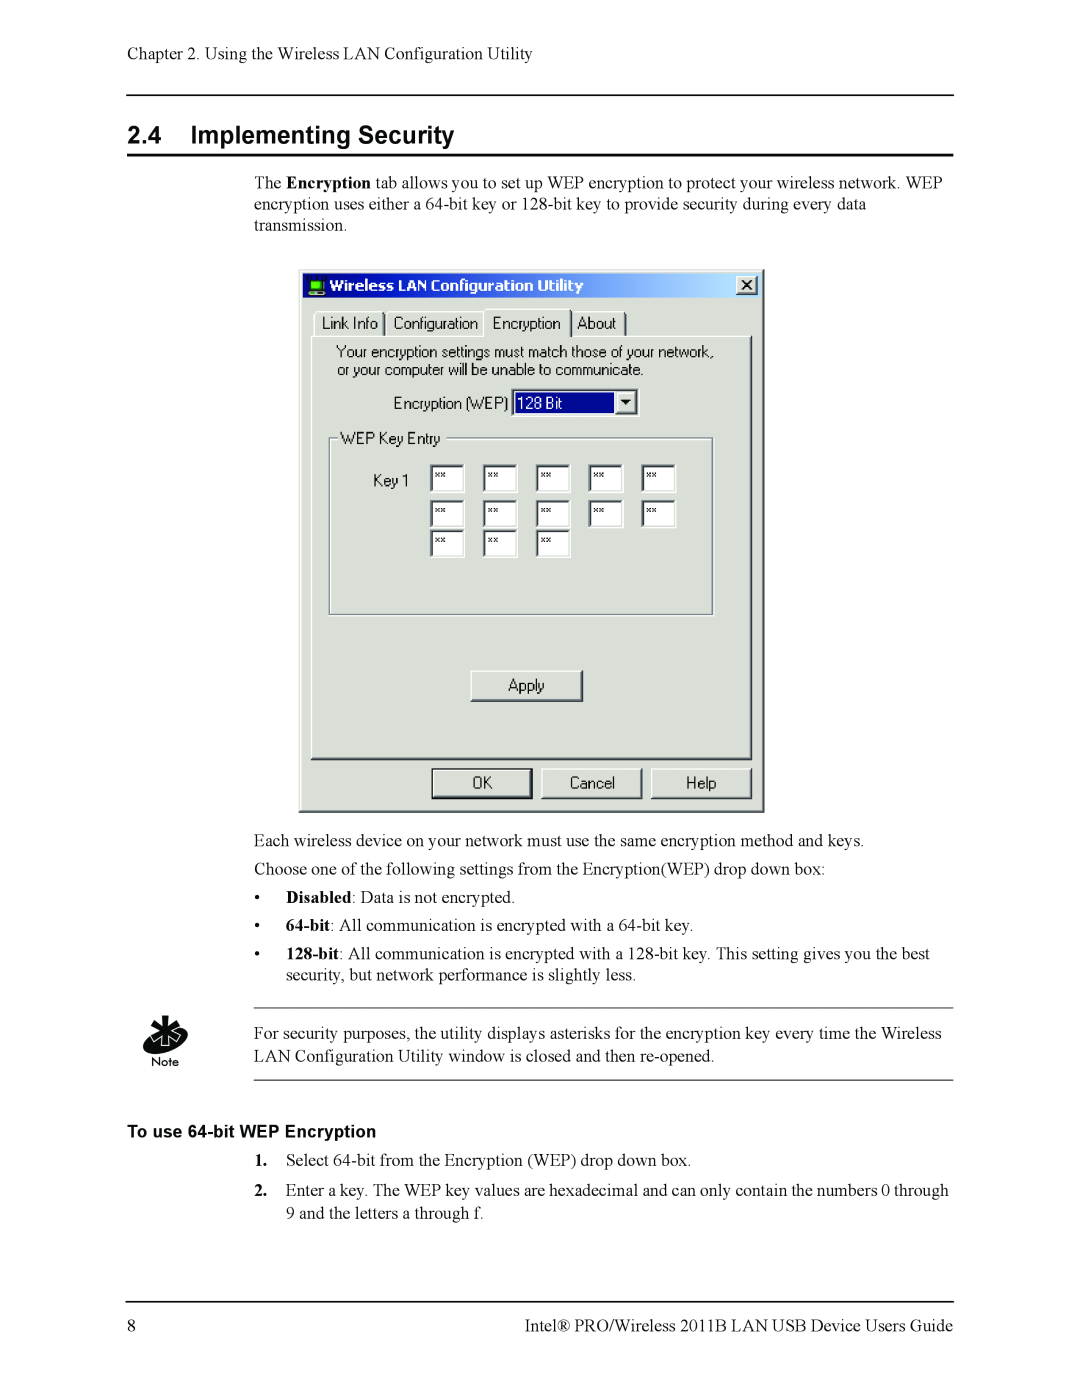 Intel 2011B manual 2.4Implementing Security, To use 64-bitWEP Encryption 